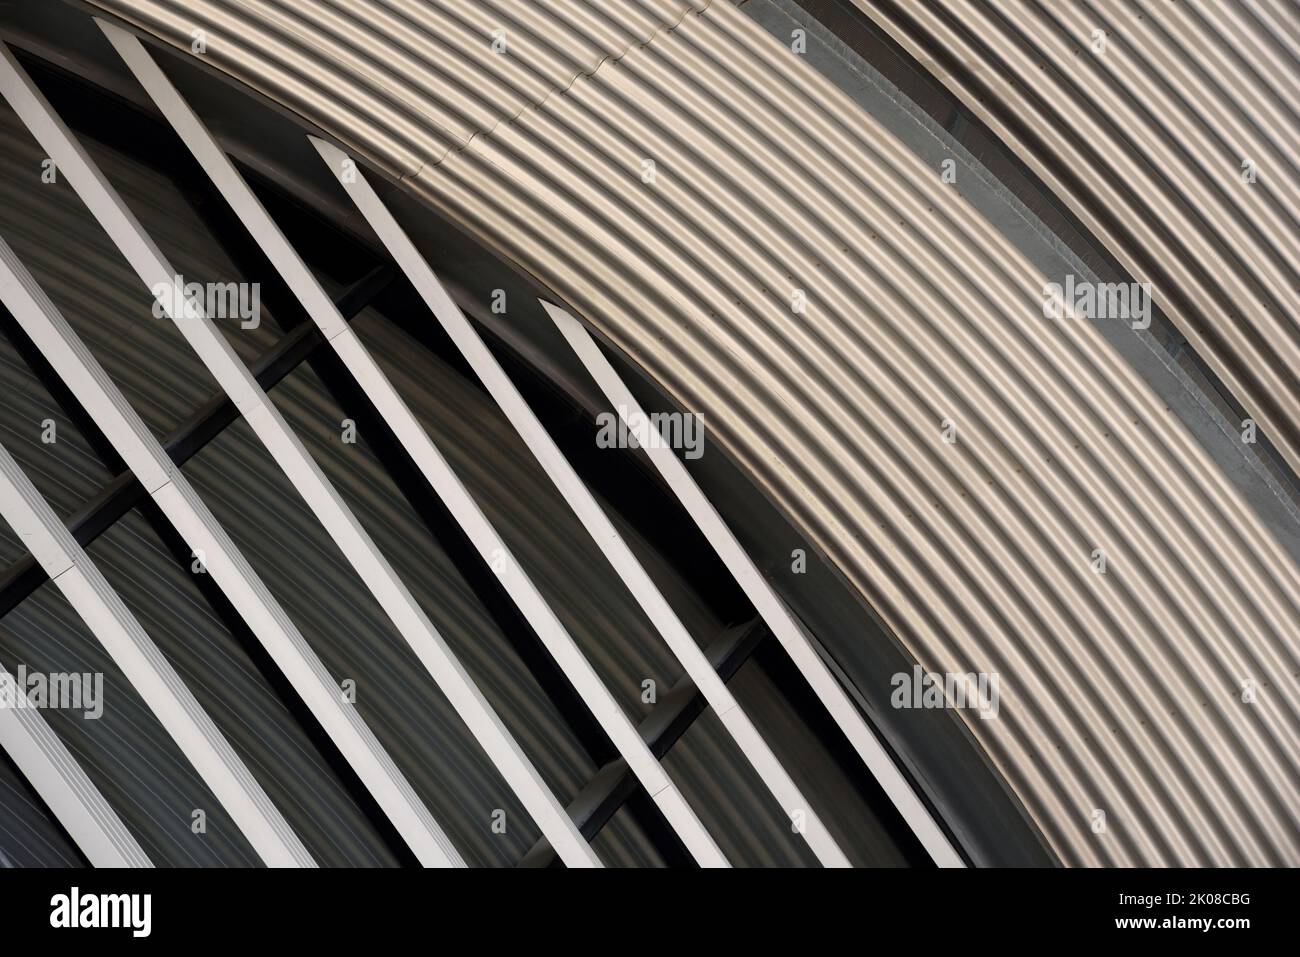 Steel Blinds or Sun Blinds of Modern Wine Cellars or Winery designed by Jean Nouvel in 2008 at Domaine La Coste or Chateau La Coste Provence France Stock Photo